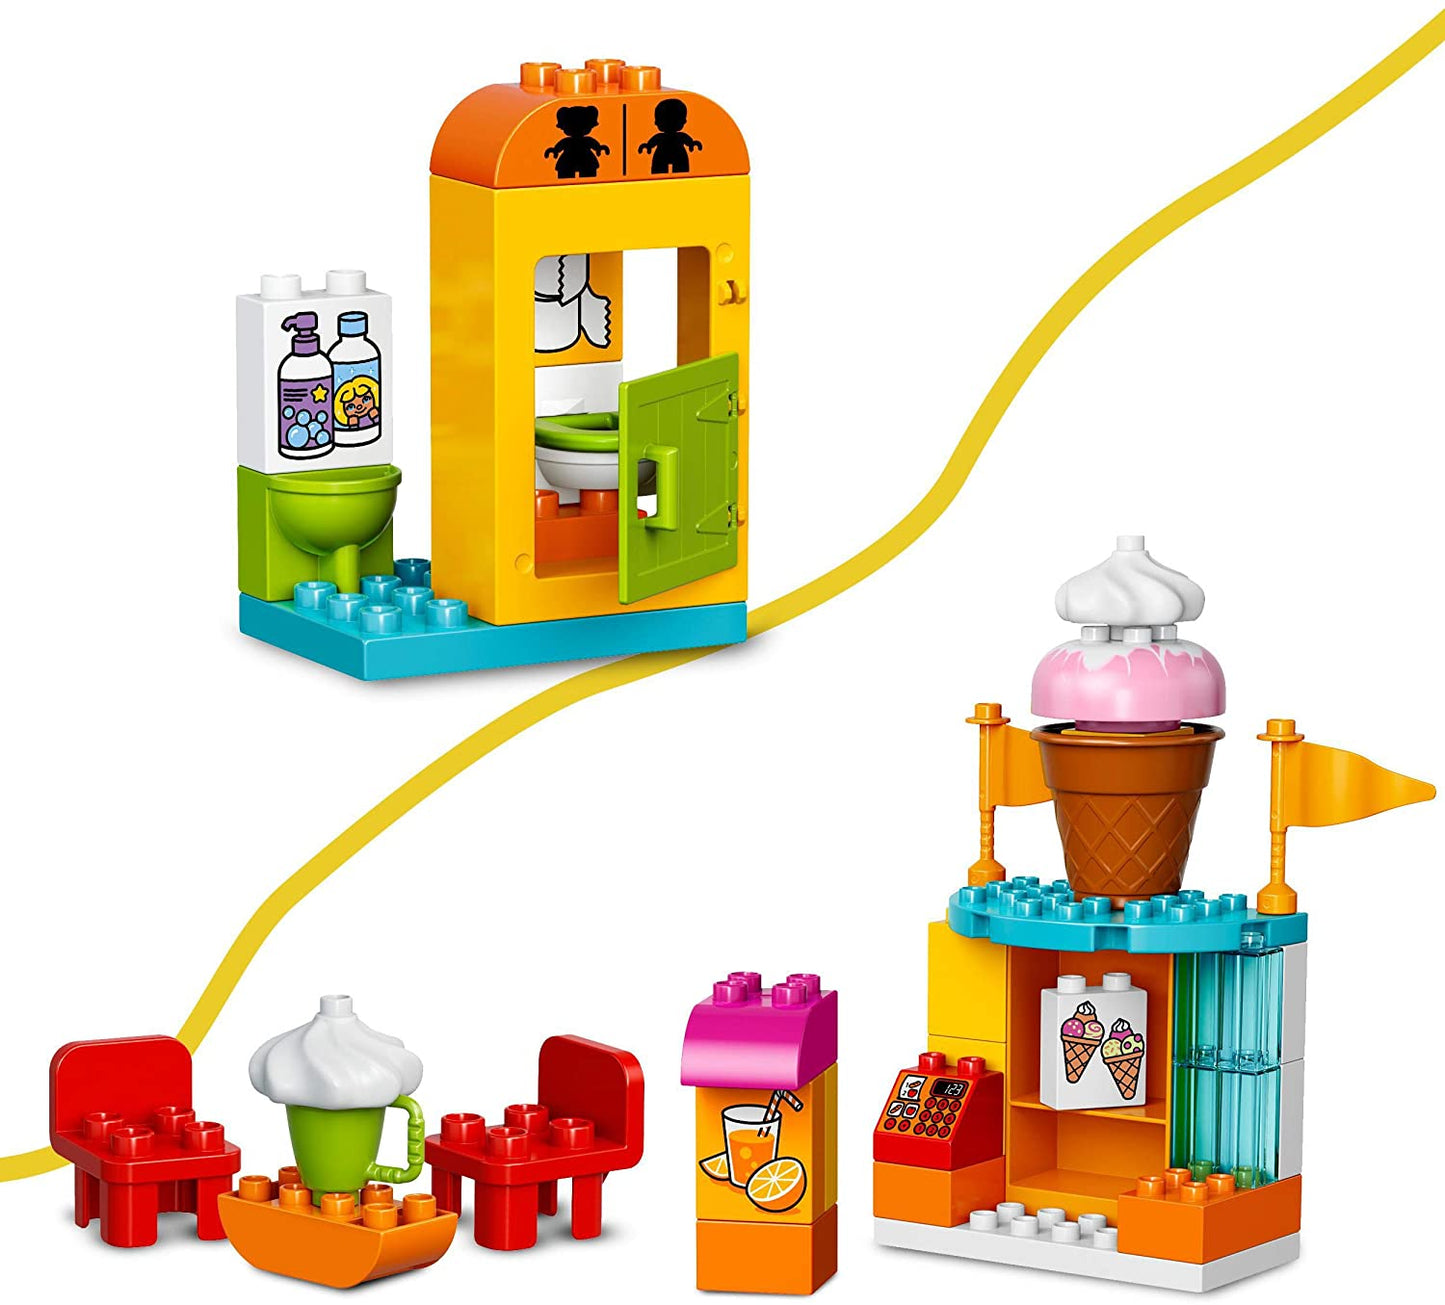 LEGO DUPLO Town Big Fair 10840 Role Play and Learning Building Blocks Set for Toddlers Including a Ferris Wheel, Carousel, and Amusement Park (106 pieces)